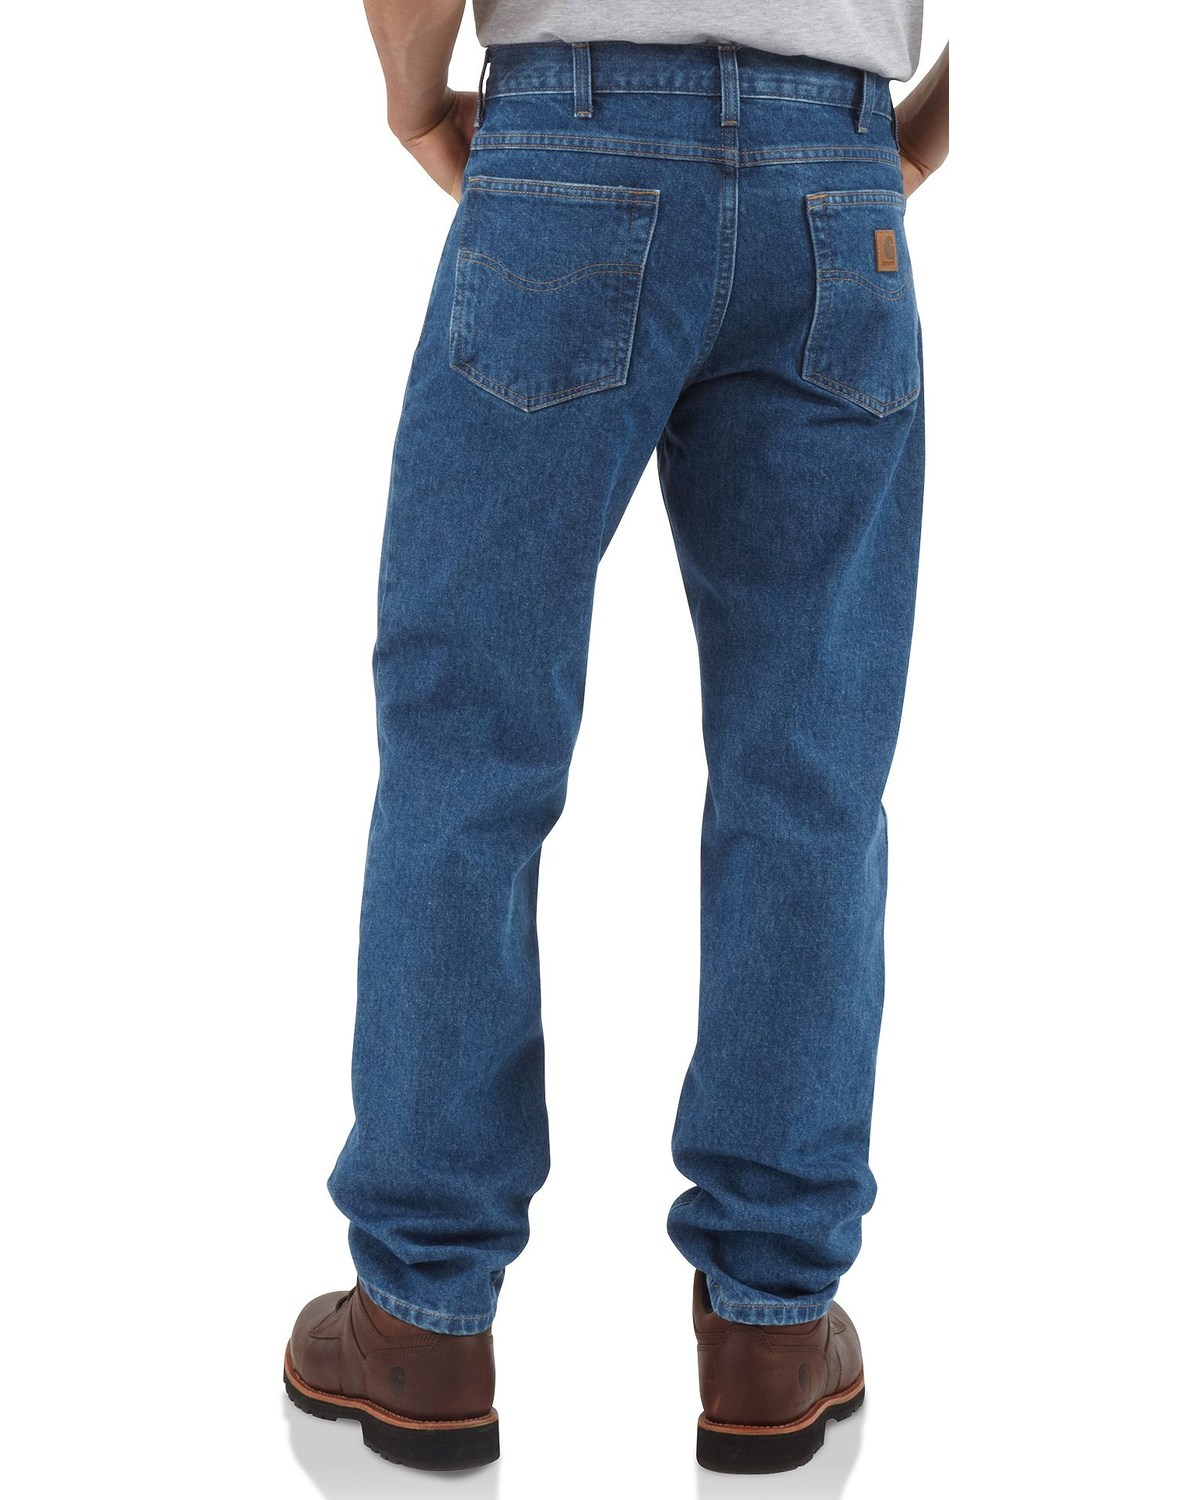 Carhartt Men's Traditional Fit Jeans | Boot Barn